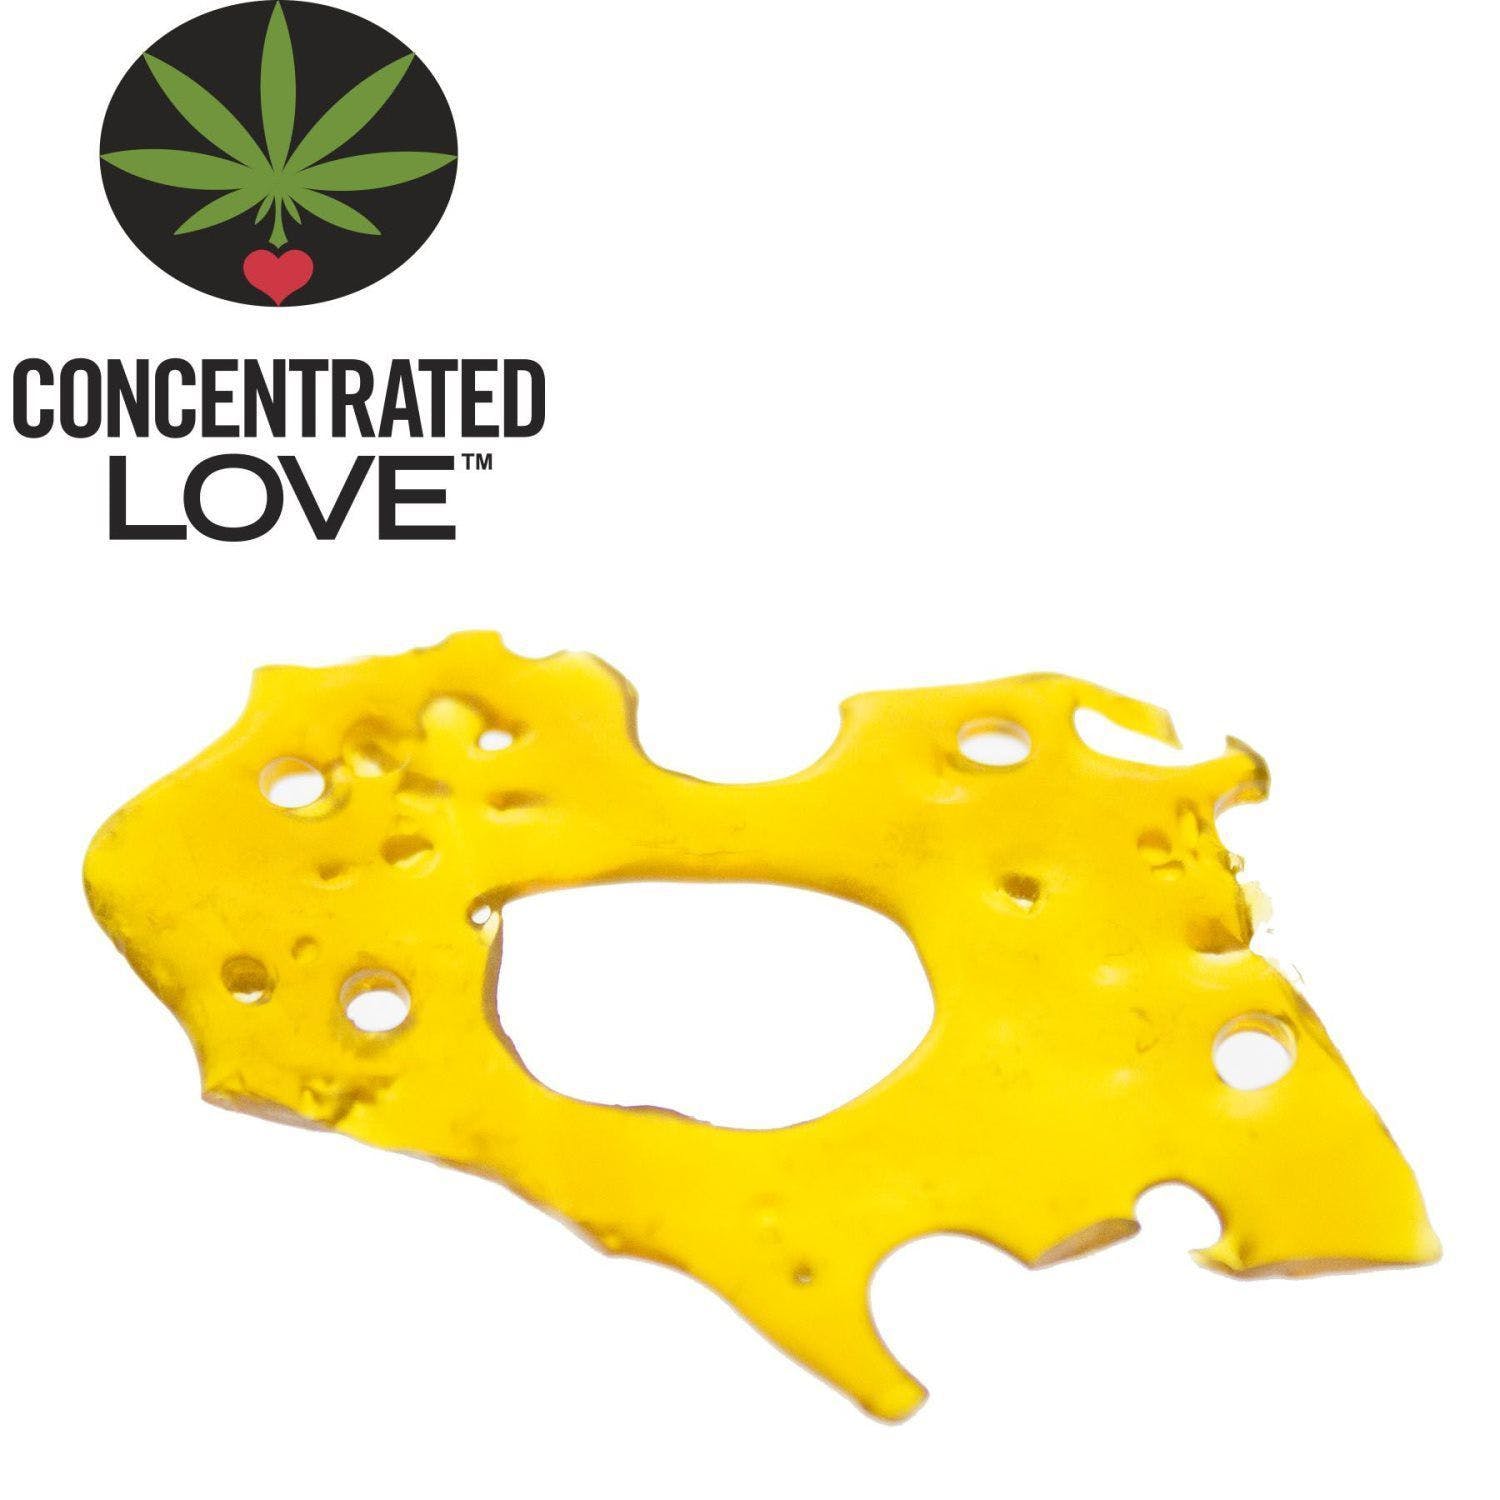 concentrate-concentrated-love-alien-star-shatter